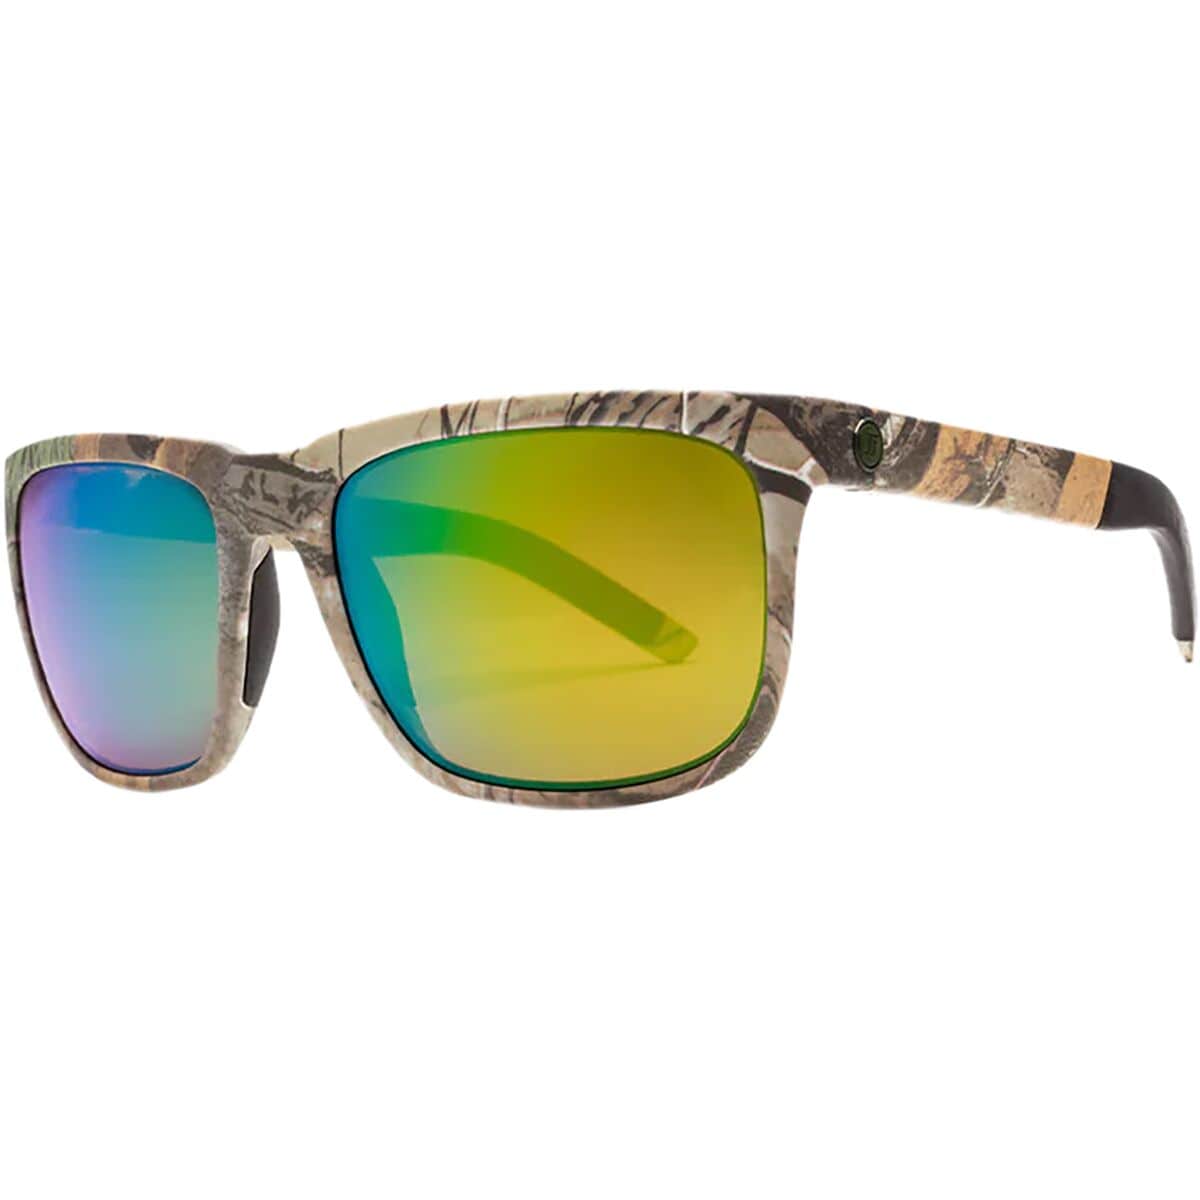 Electric Knoxville S Polarized Sunglasses